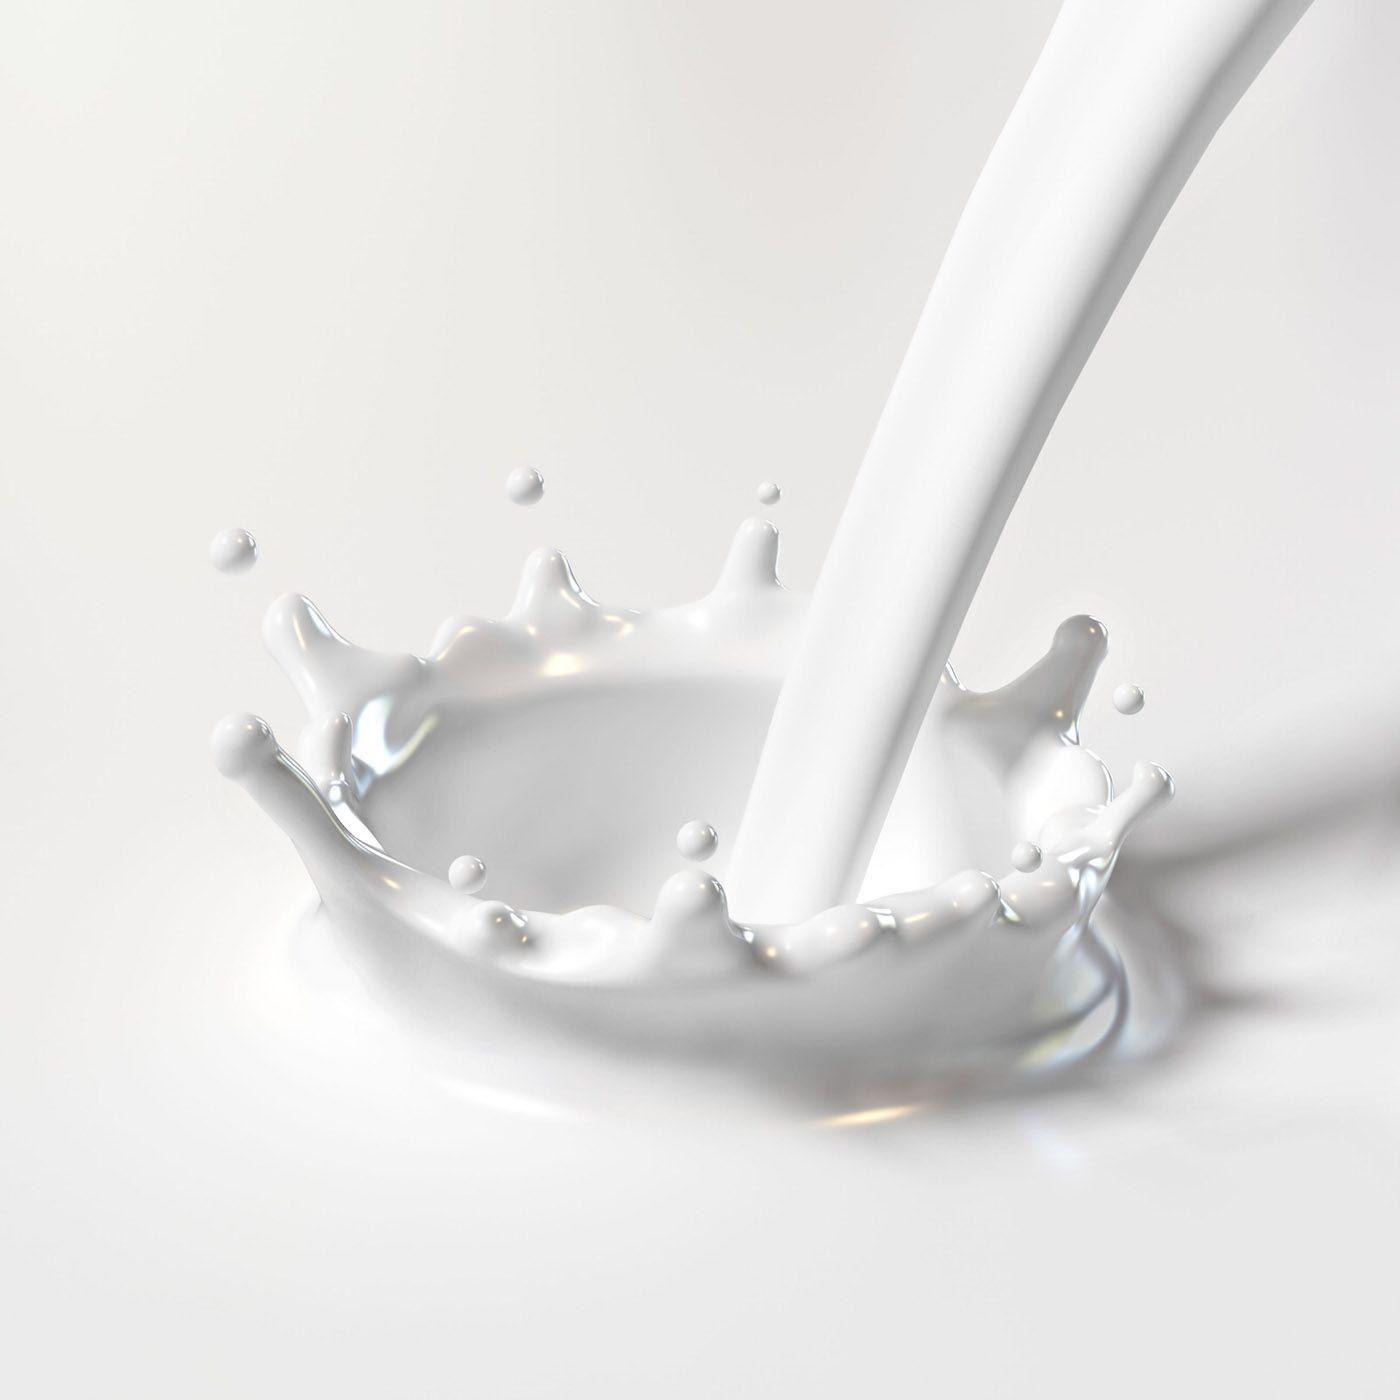 Cup of Milk 1 Free Photo Download | FreeImages